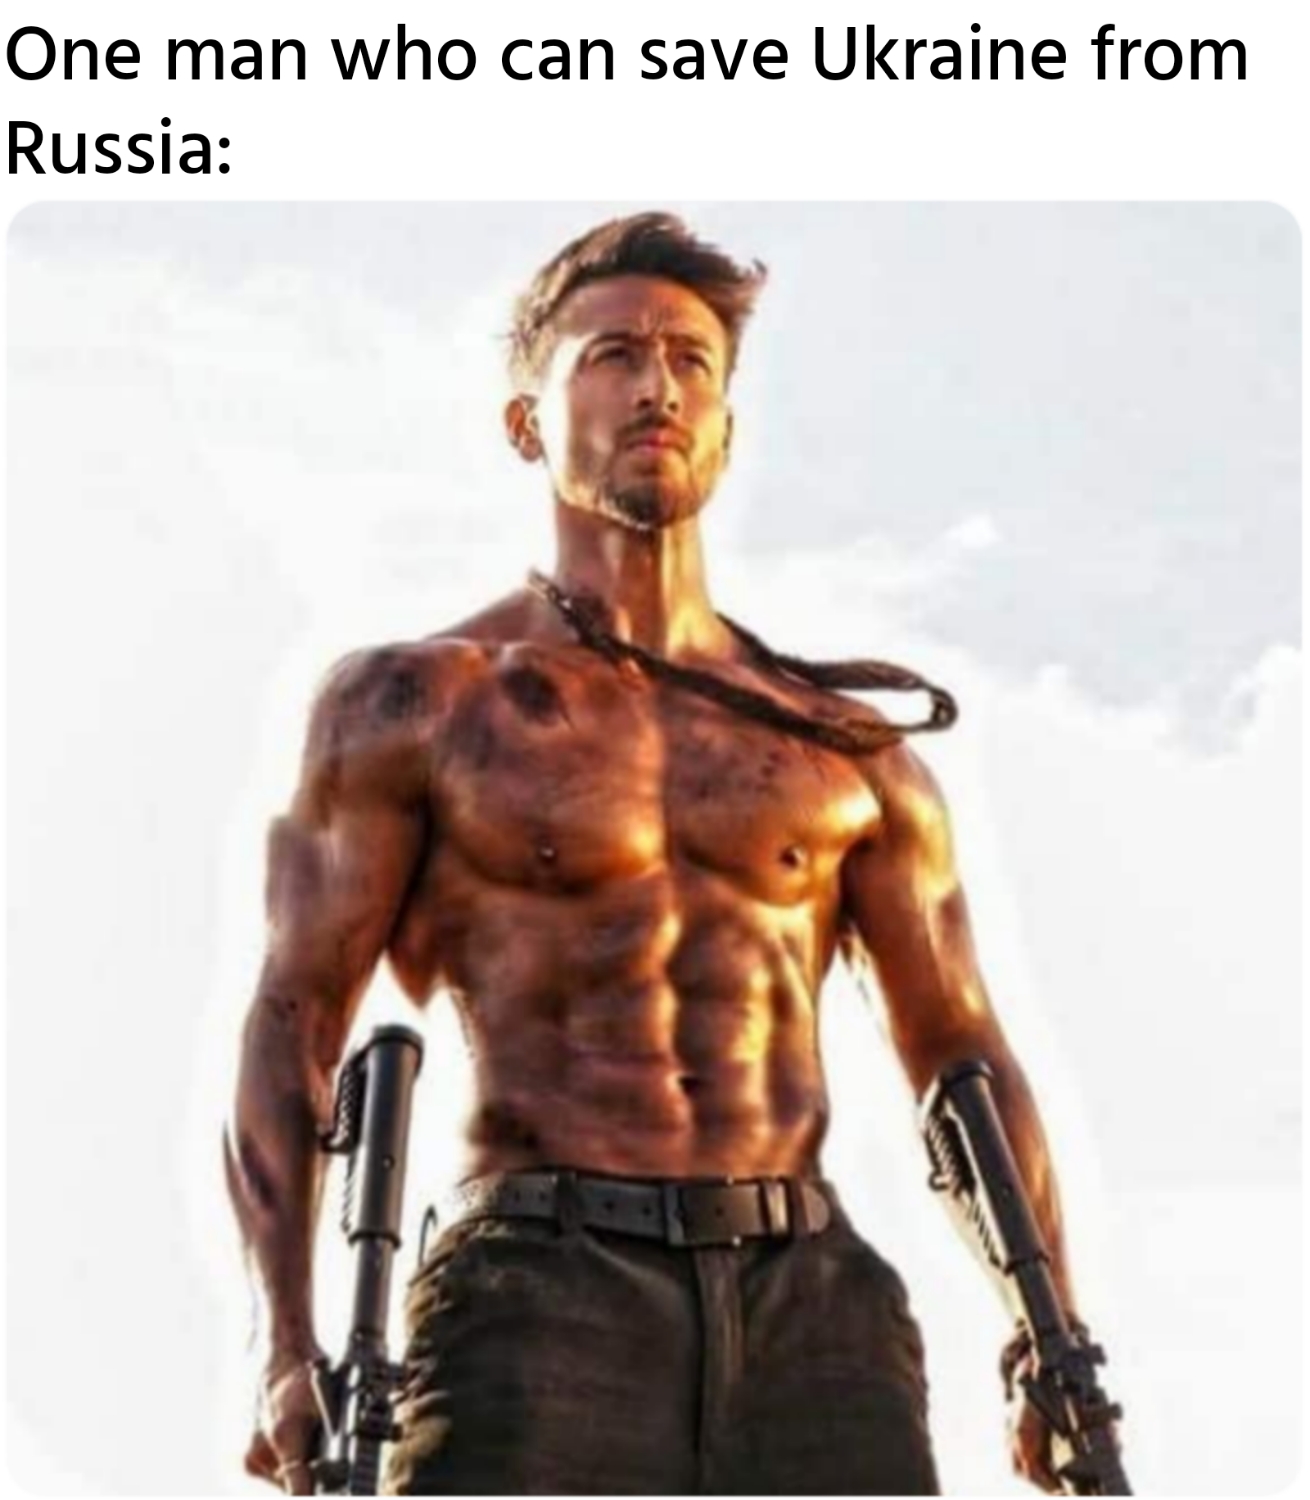 One man who can save Ukraine from Russia: meme.jpg